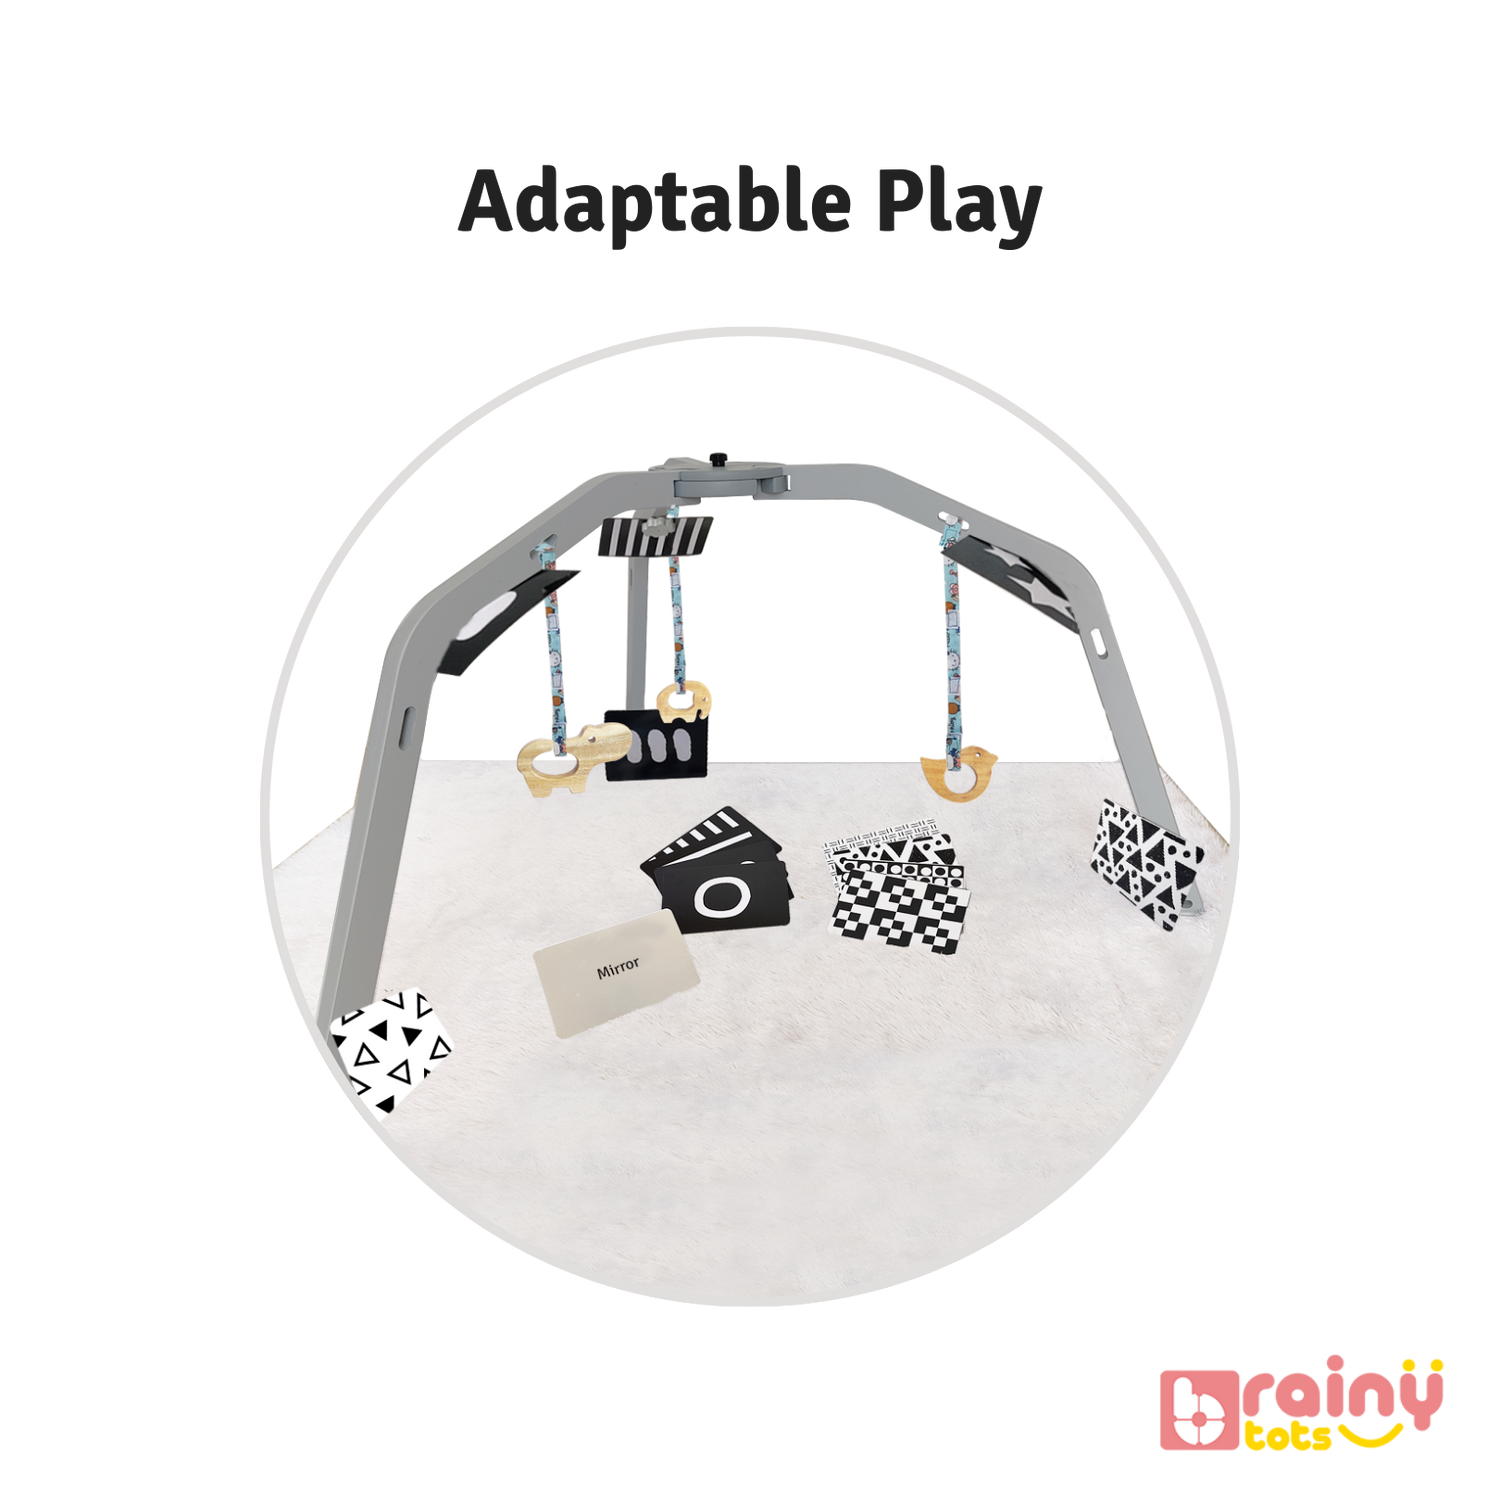 Offers adjustable toy heights and flashcard positions, promoting adaptability and continuous engagement. This Montessori wooden play gym, ideal for babies aged 0-12 months, enhances sensory development with varied textures and interactive elements. Safe, sturdy, and engaging for early learning and exploration.